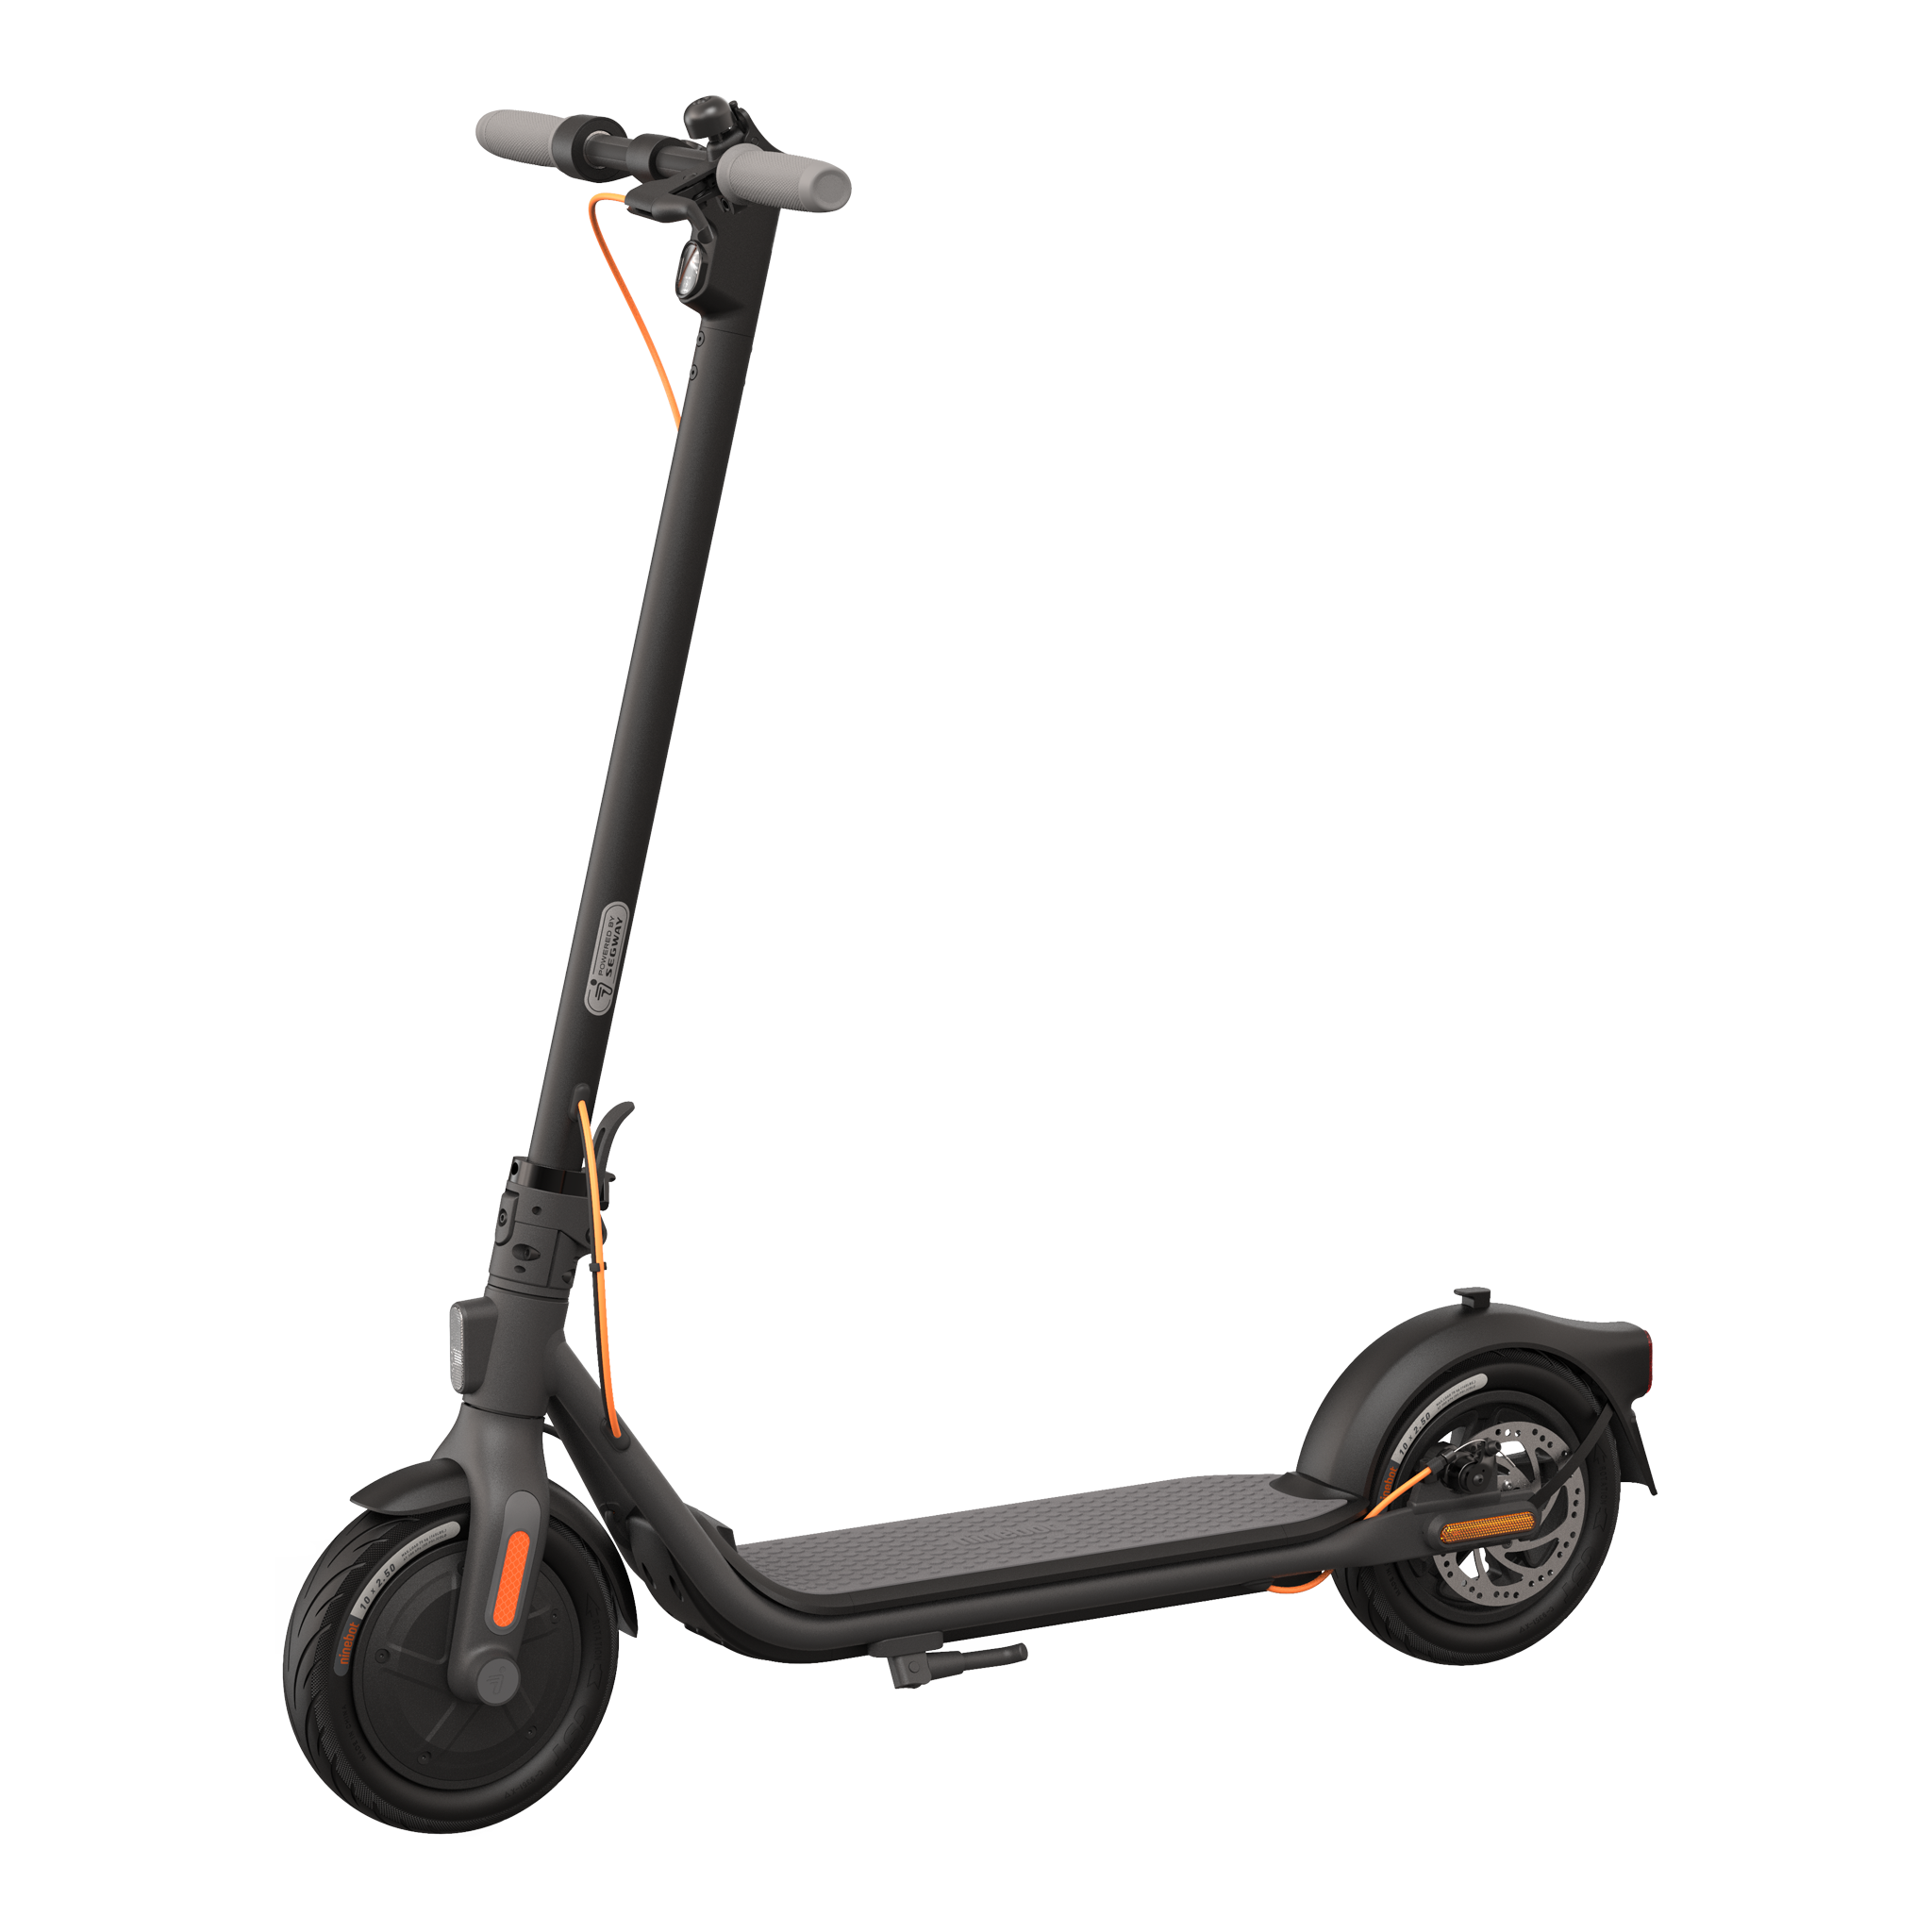 Acer scooter series 3. Электросамокат Ninebot KICKSCOOTER gt1 (SUPERSCOOTER gt1). Ninebot d18u. Segway Ninebot gt2. Электросамокат Ninebot KICKSCOOTER d18u, до 100 кг, черный.